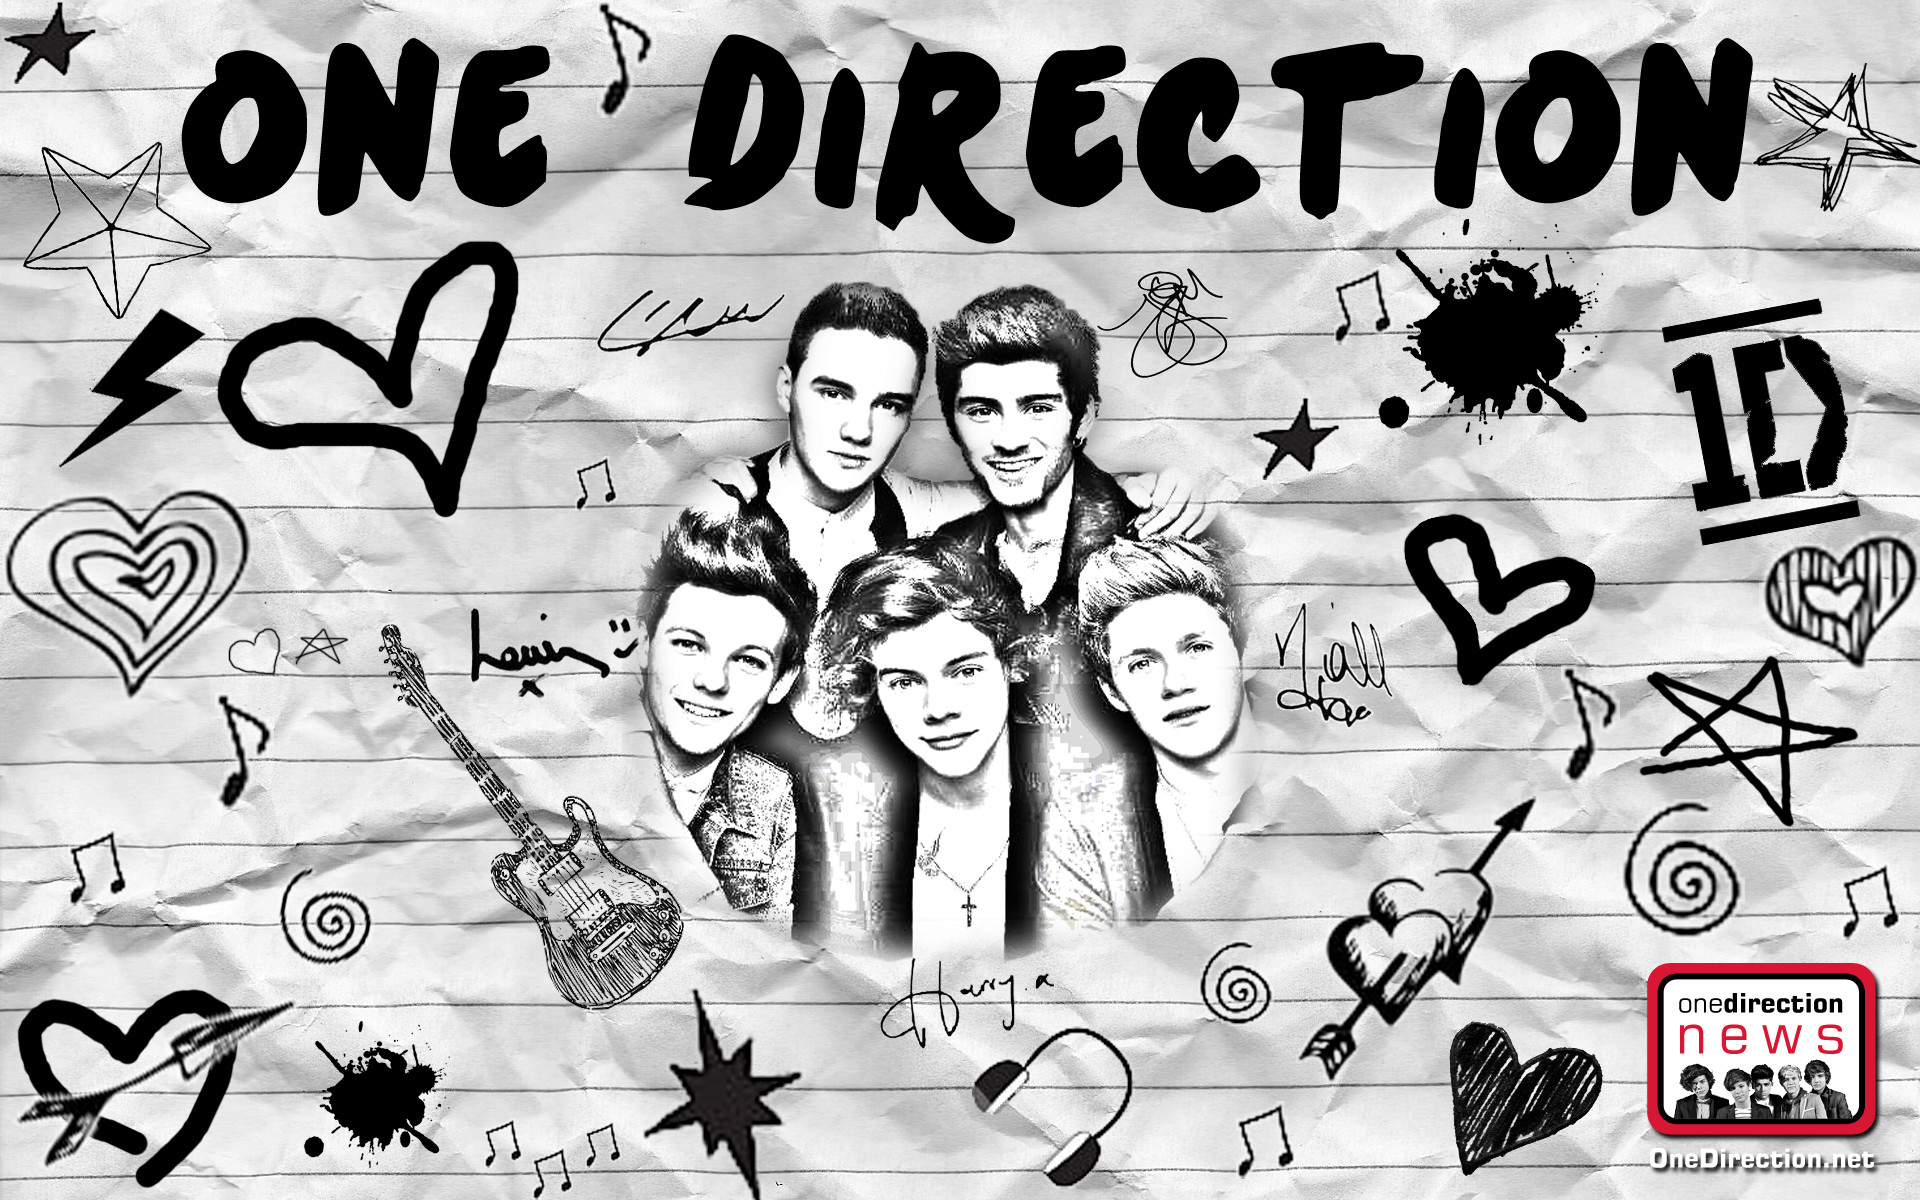 One Direction 2014 Wallpaper For Ipad Image Gallery, Picture .